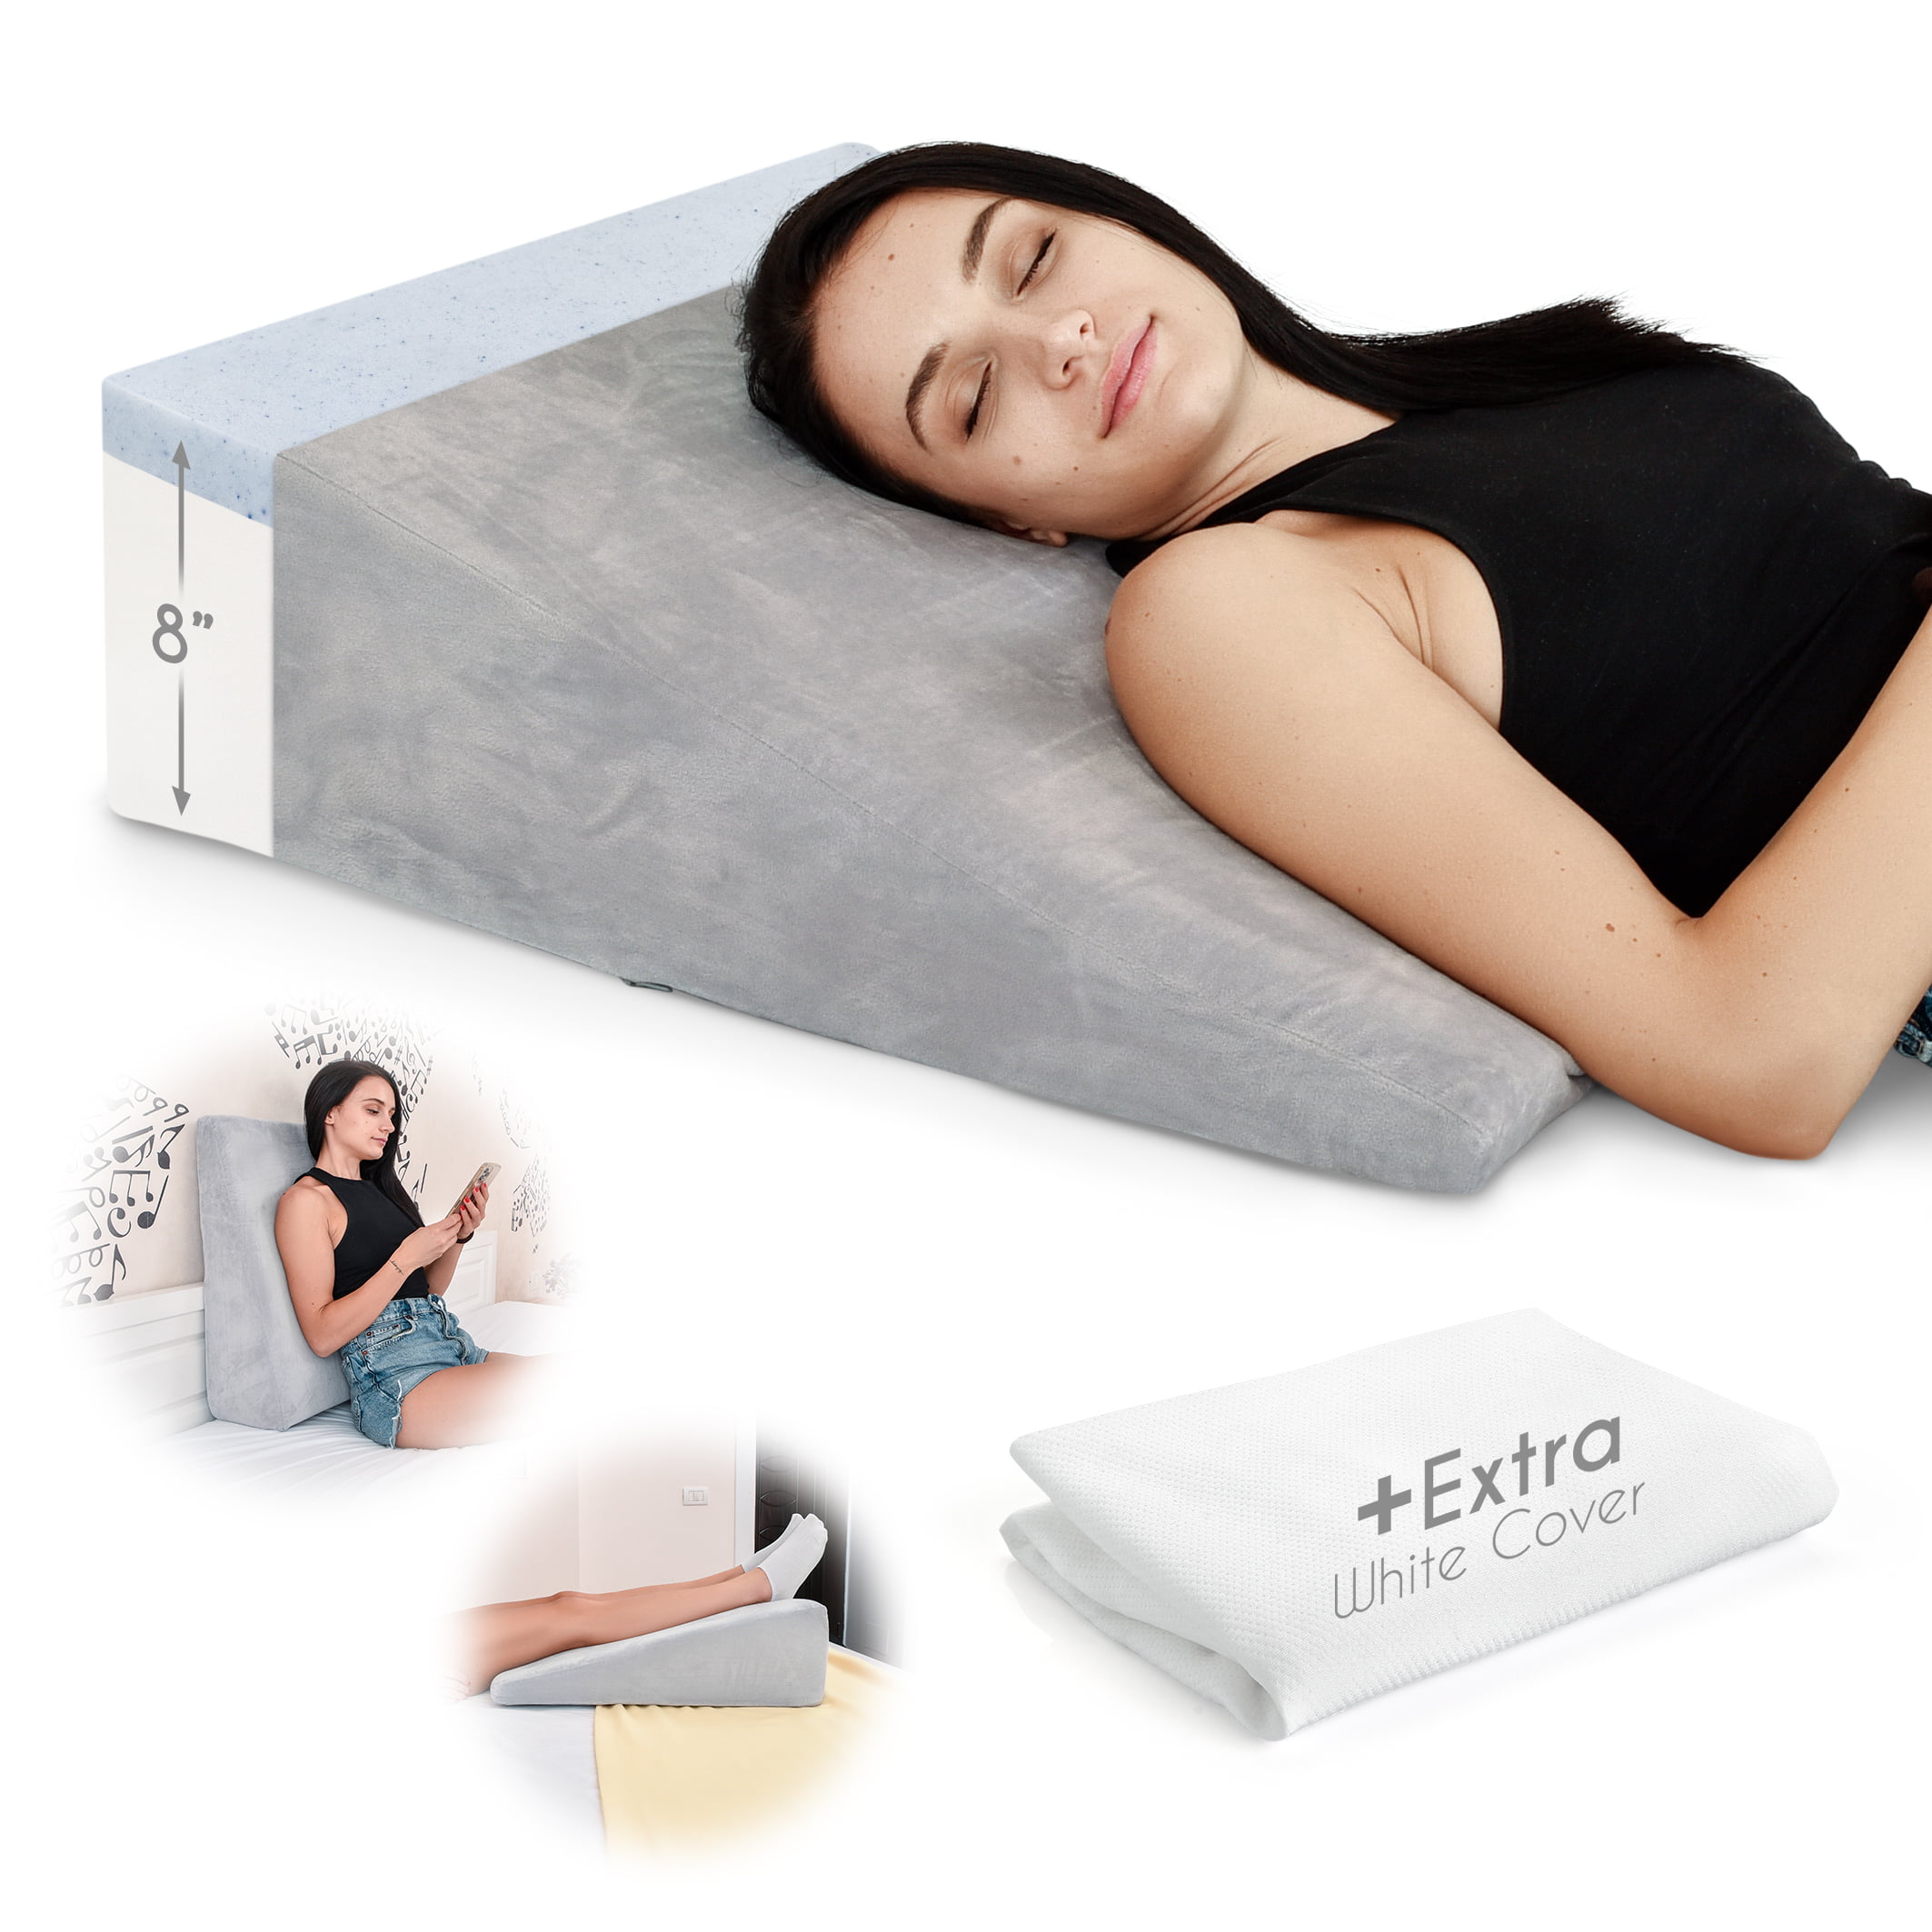 7.5Inch Foam Wedge Pillow Sleep Pillow Support For Snoring & Pregnancy Cushion 